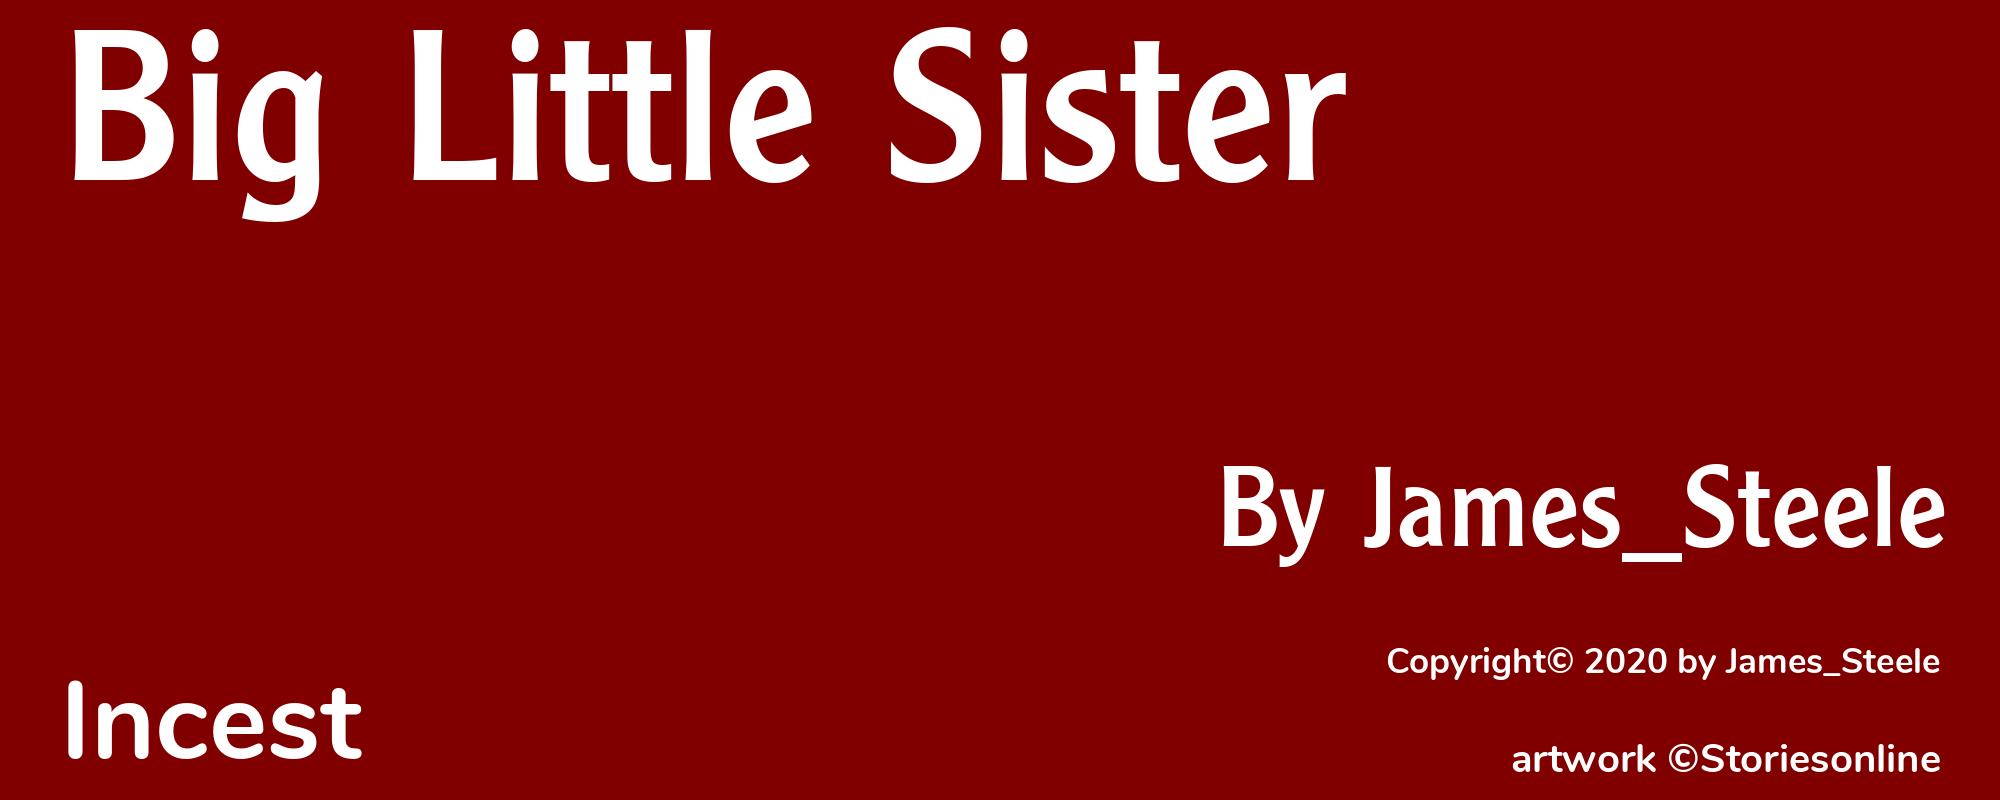 Big Little Sister - Cover